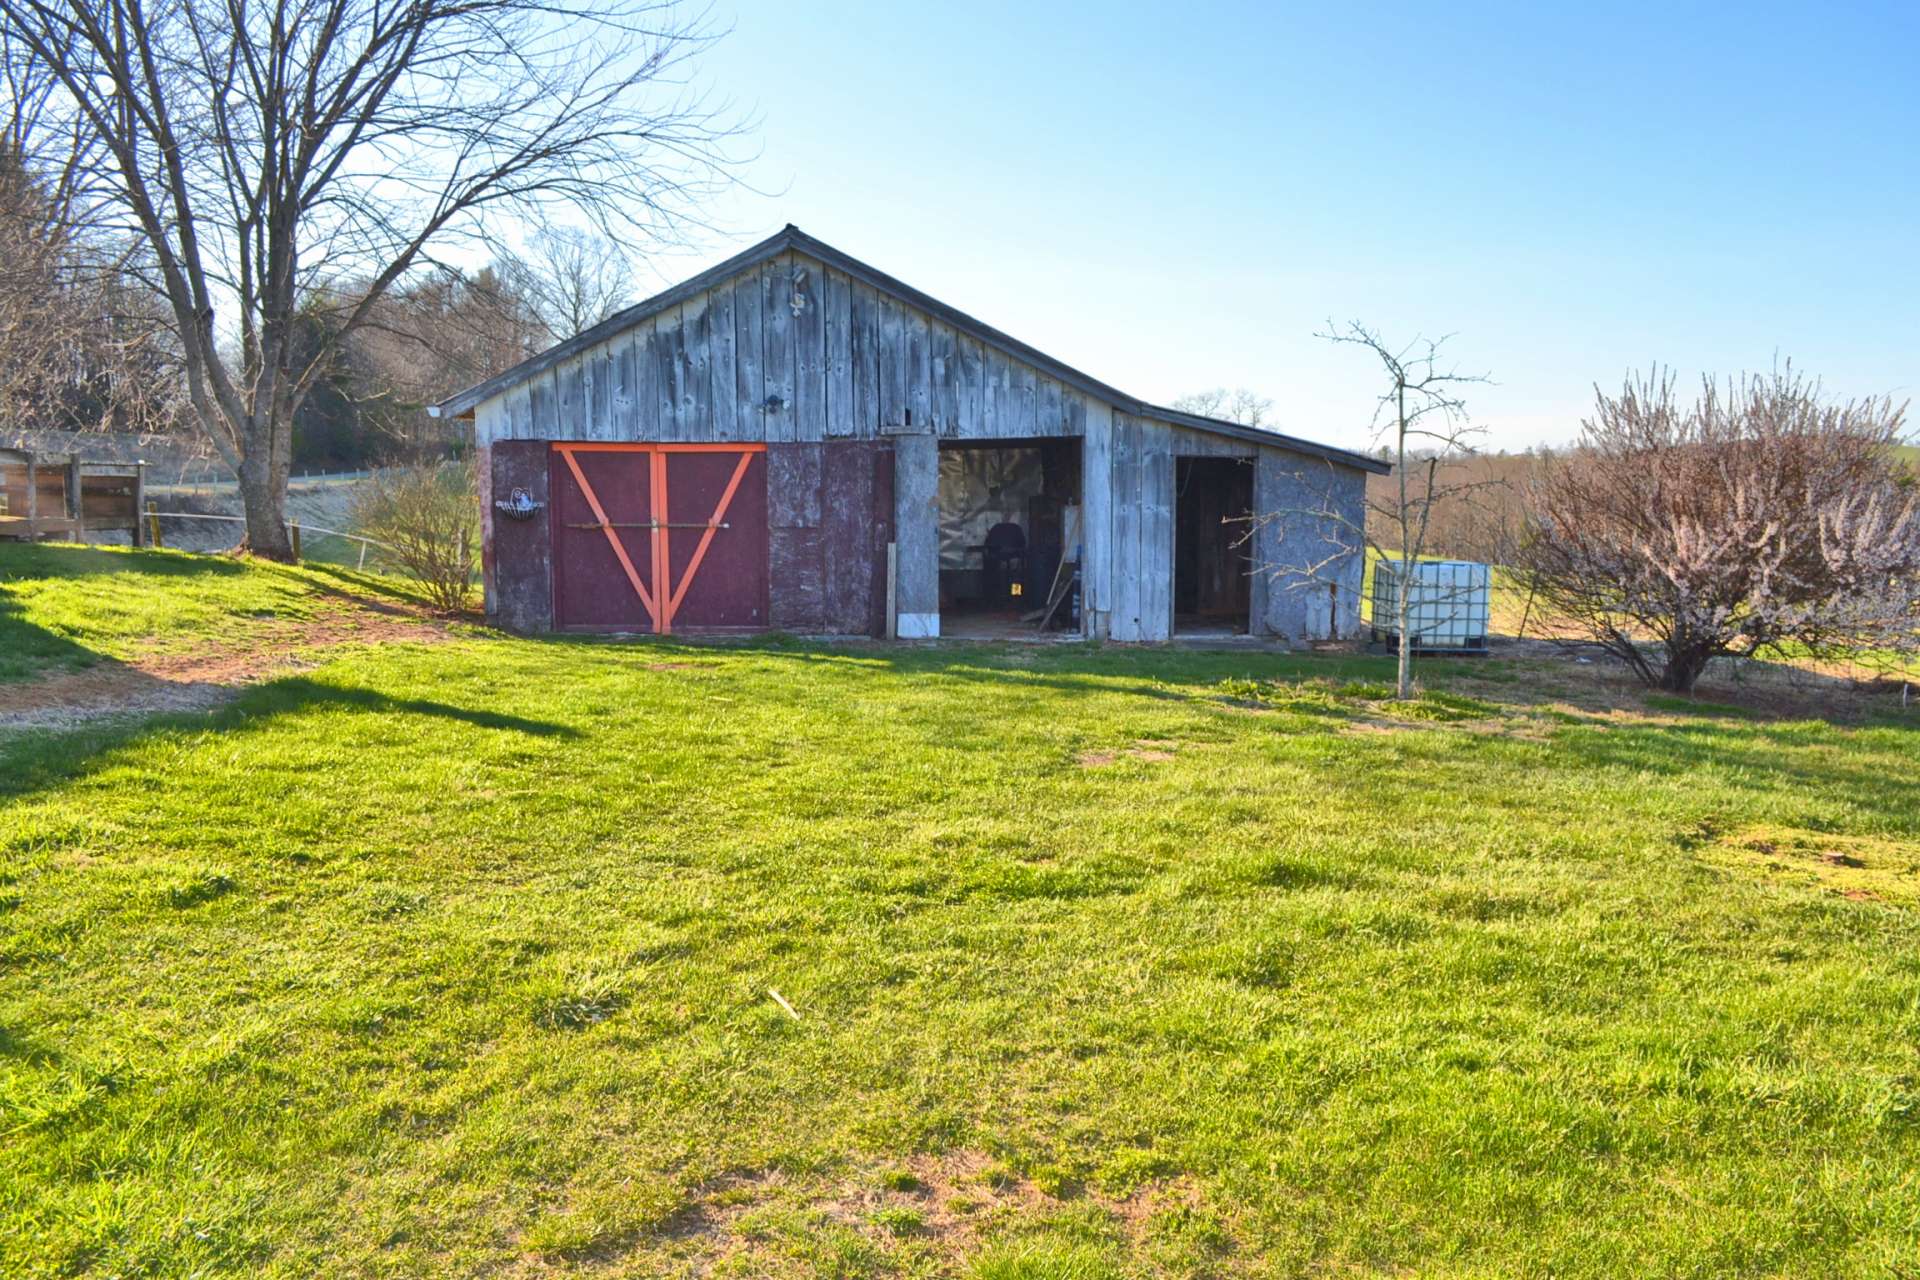 One of two barns on the property.